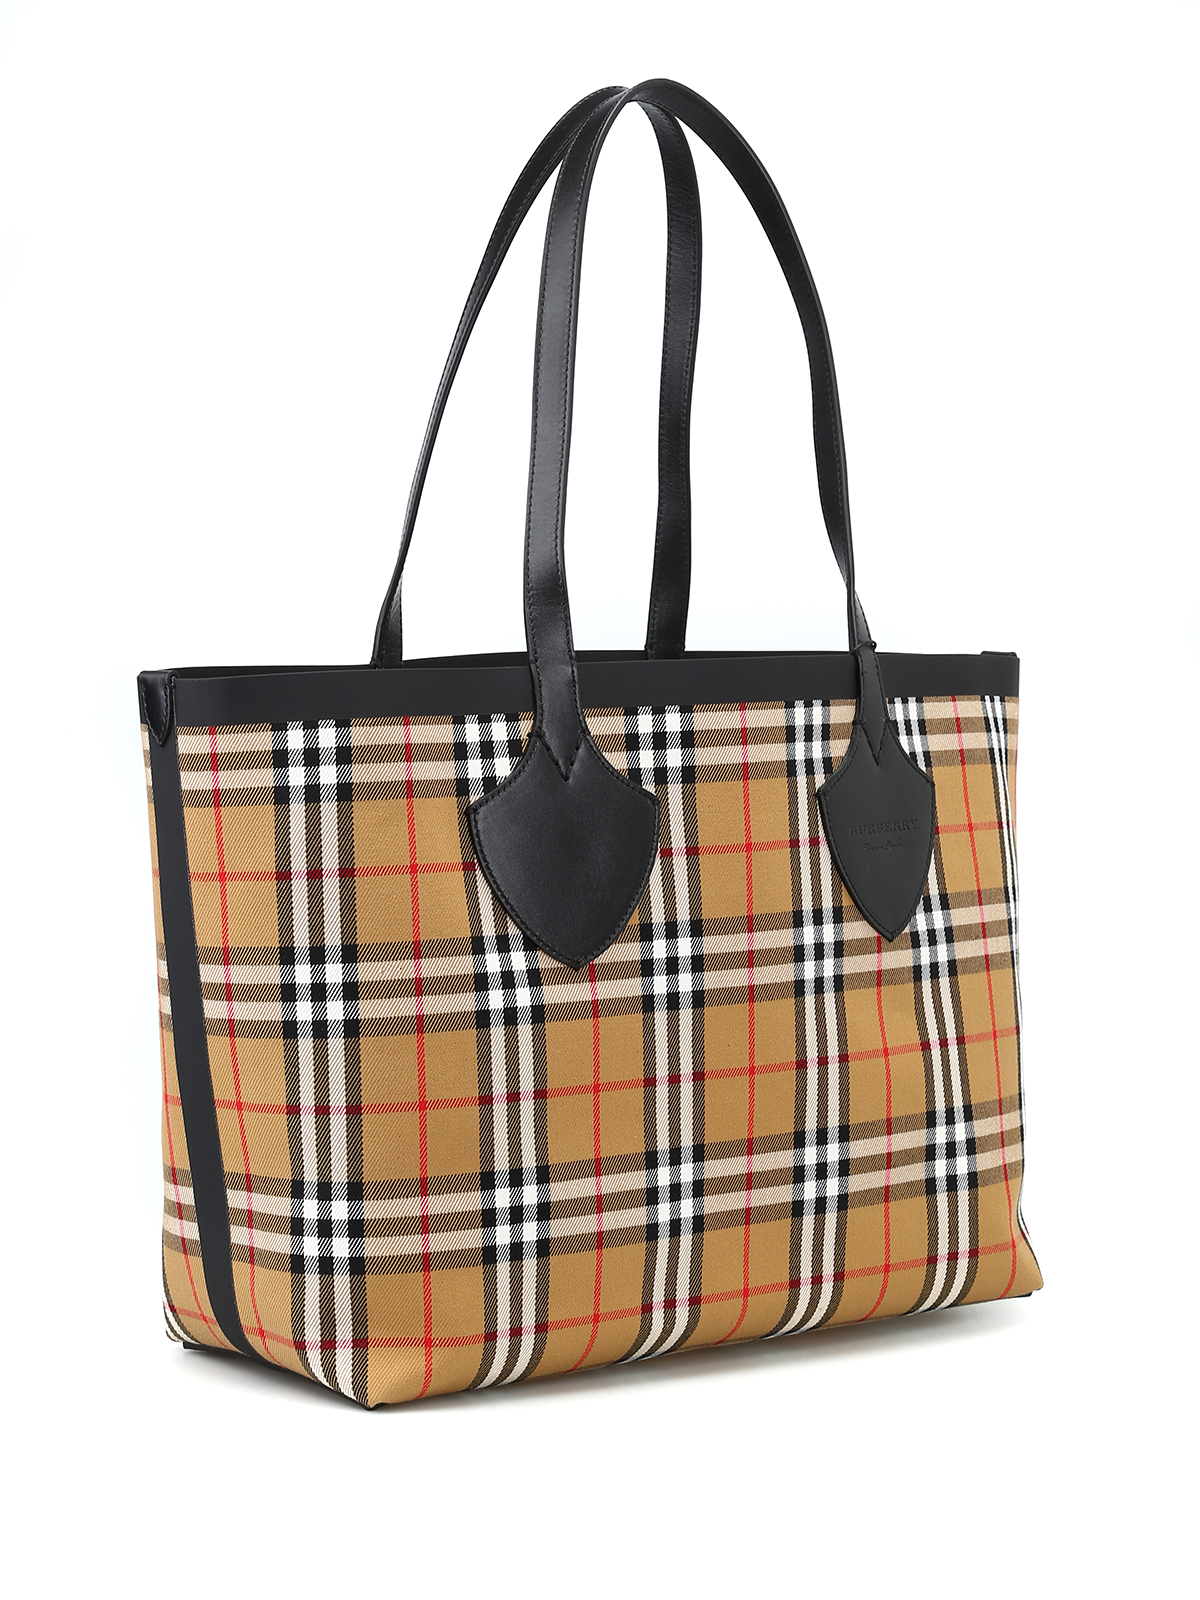 Totes bags Burberry - The Medium Giant cotton reversible tote - 4069796